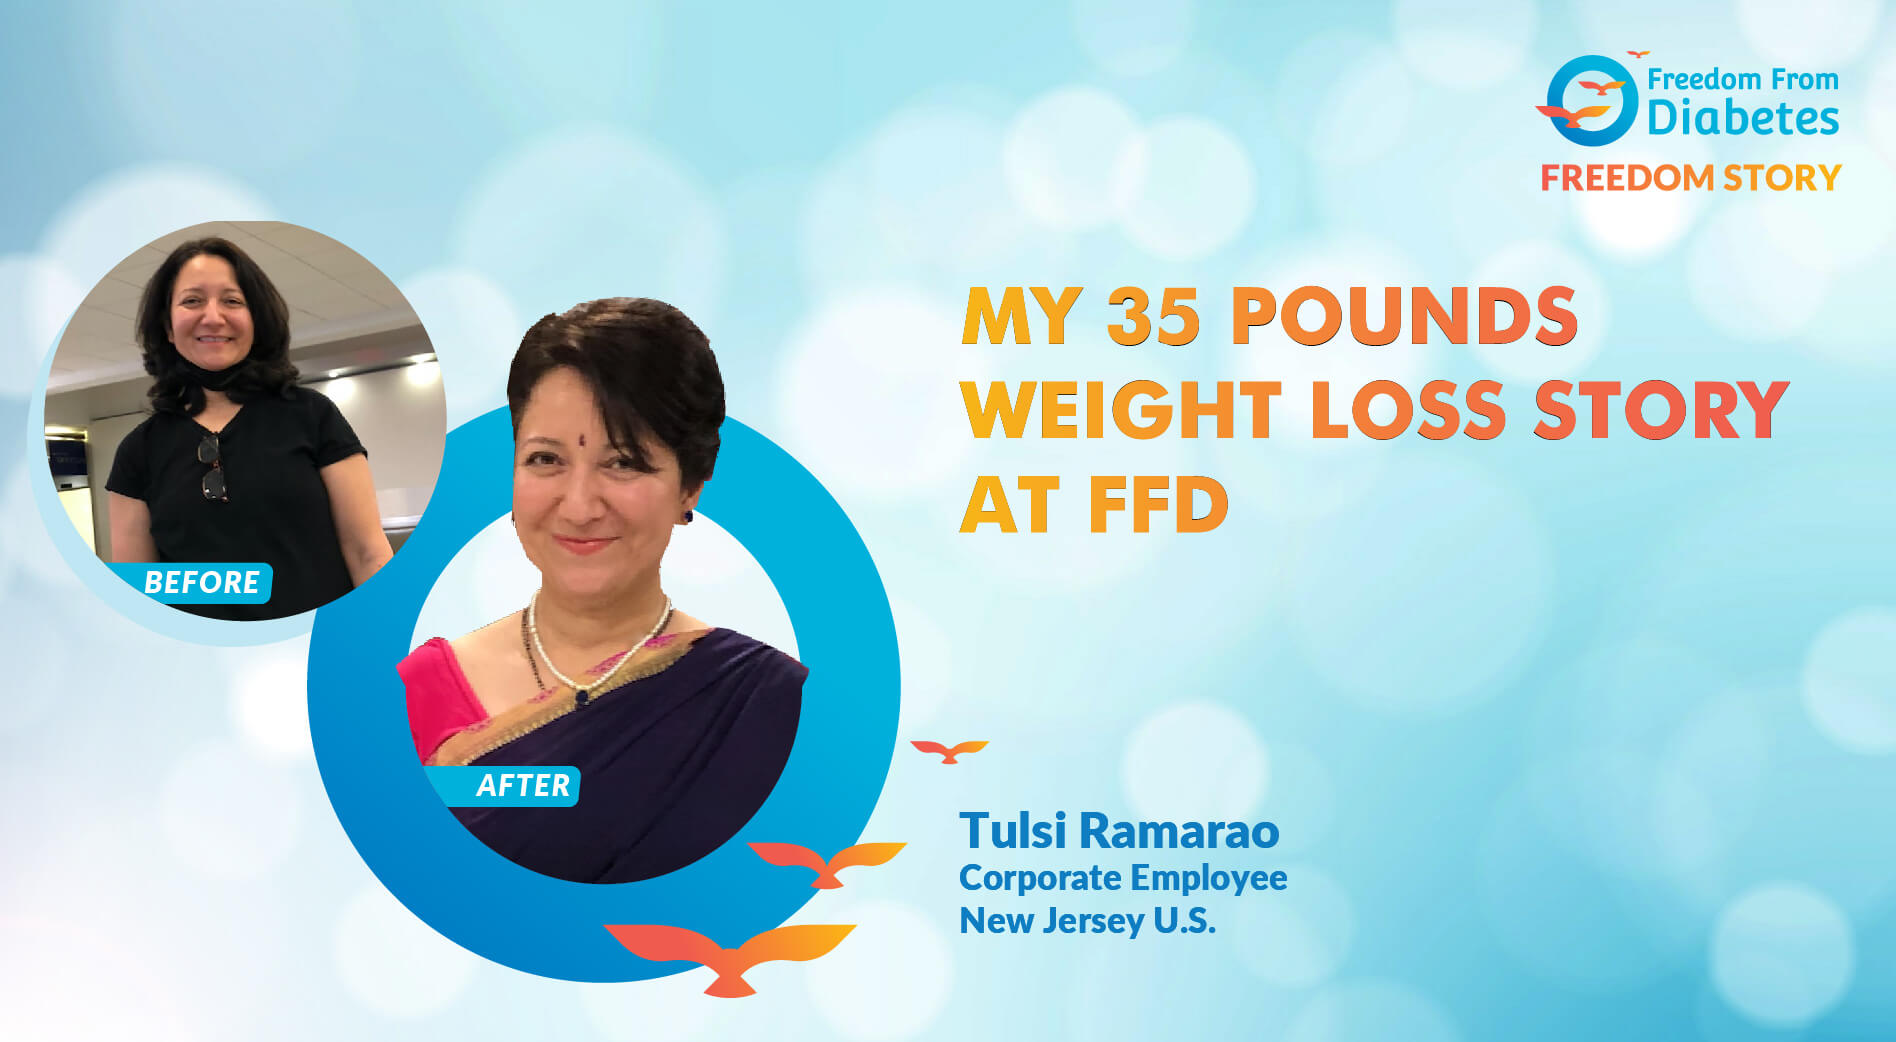 My 35 pounds weight loss story at FFD